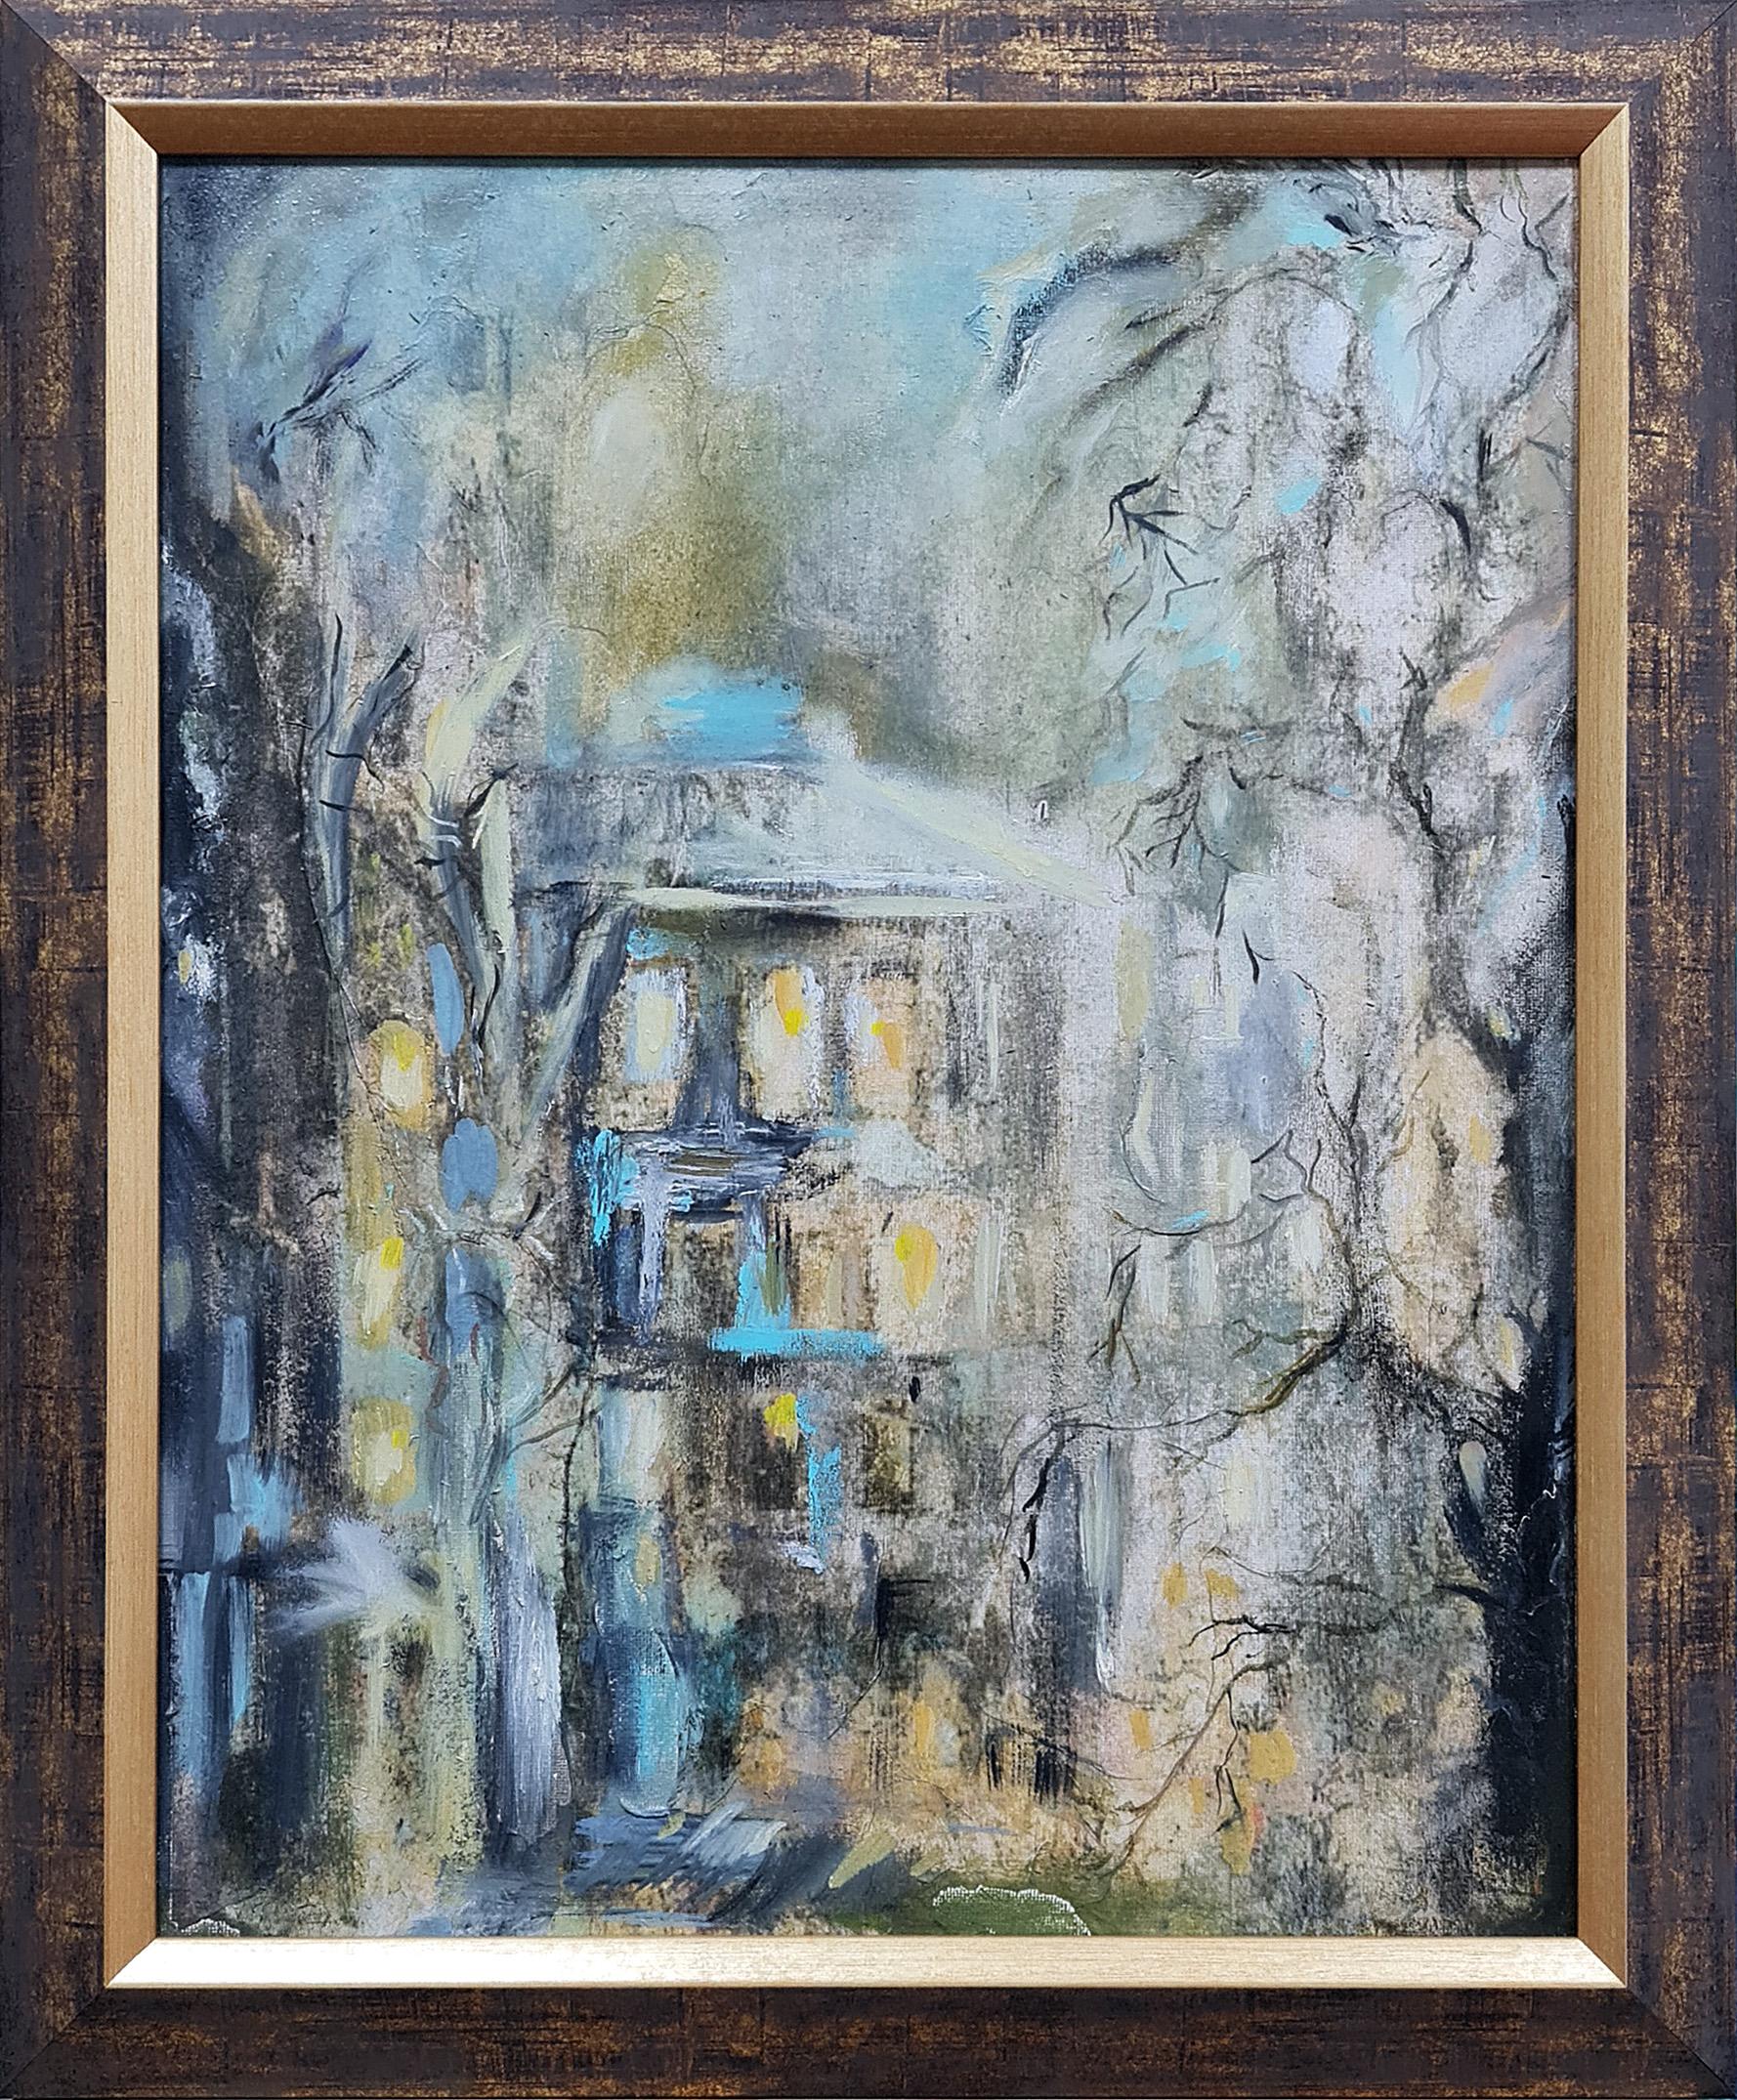 The paintings are drawn with oil on the canvas.
The simple attractiveness of run-down apartments.
The scene in the winter is radiant with light. An ancient tree in front of the residence. It is identical to the house. Large, sweet, and incredibly